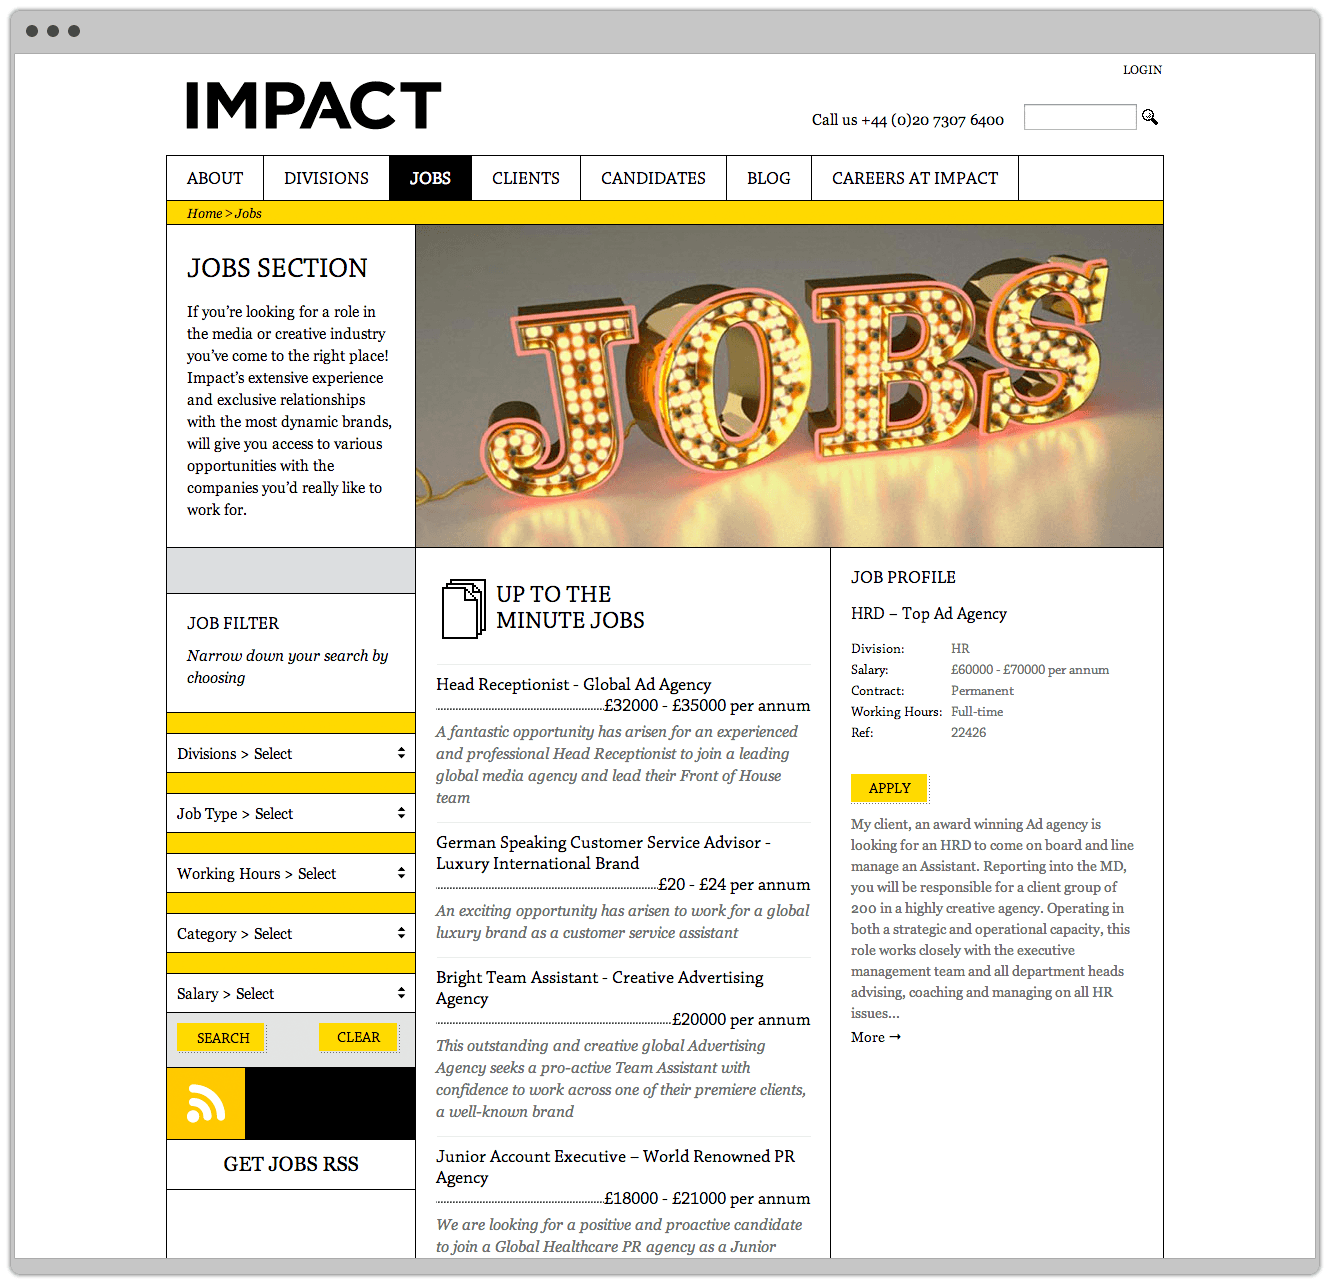 Job Listing On Recruitment Website For Www.impact London.com Designed By &&& Creative